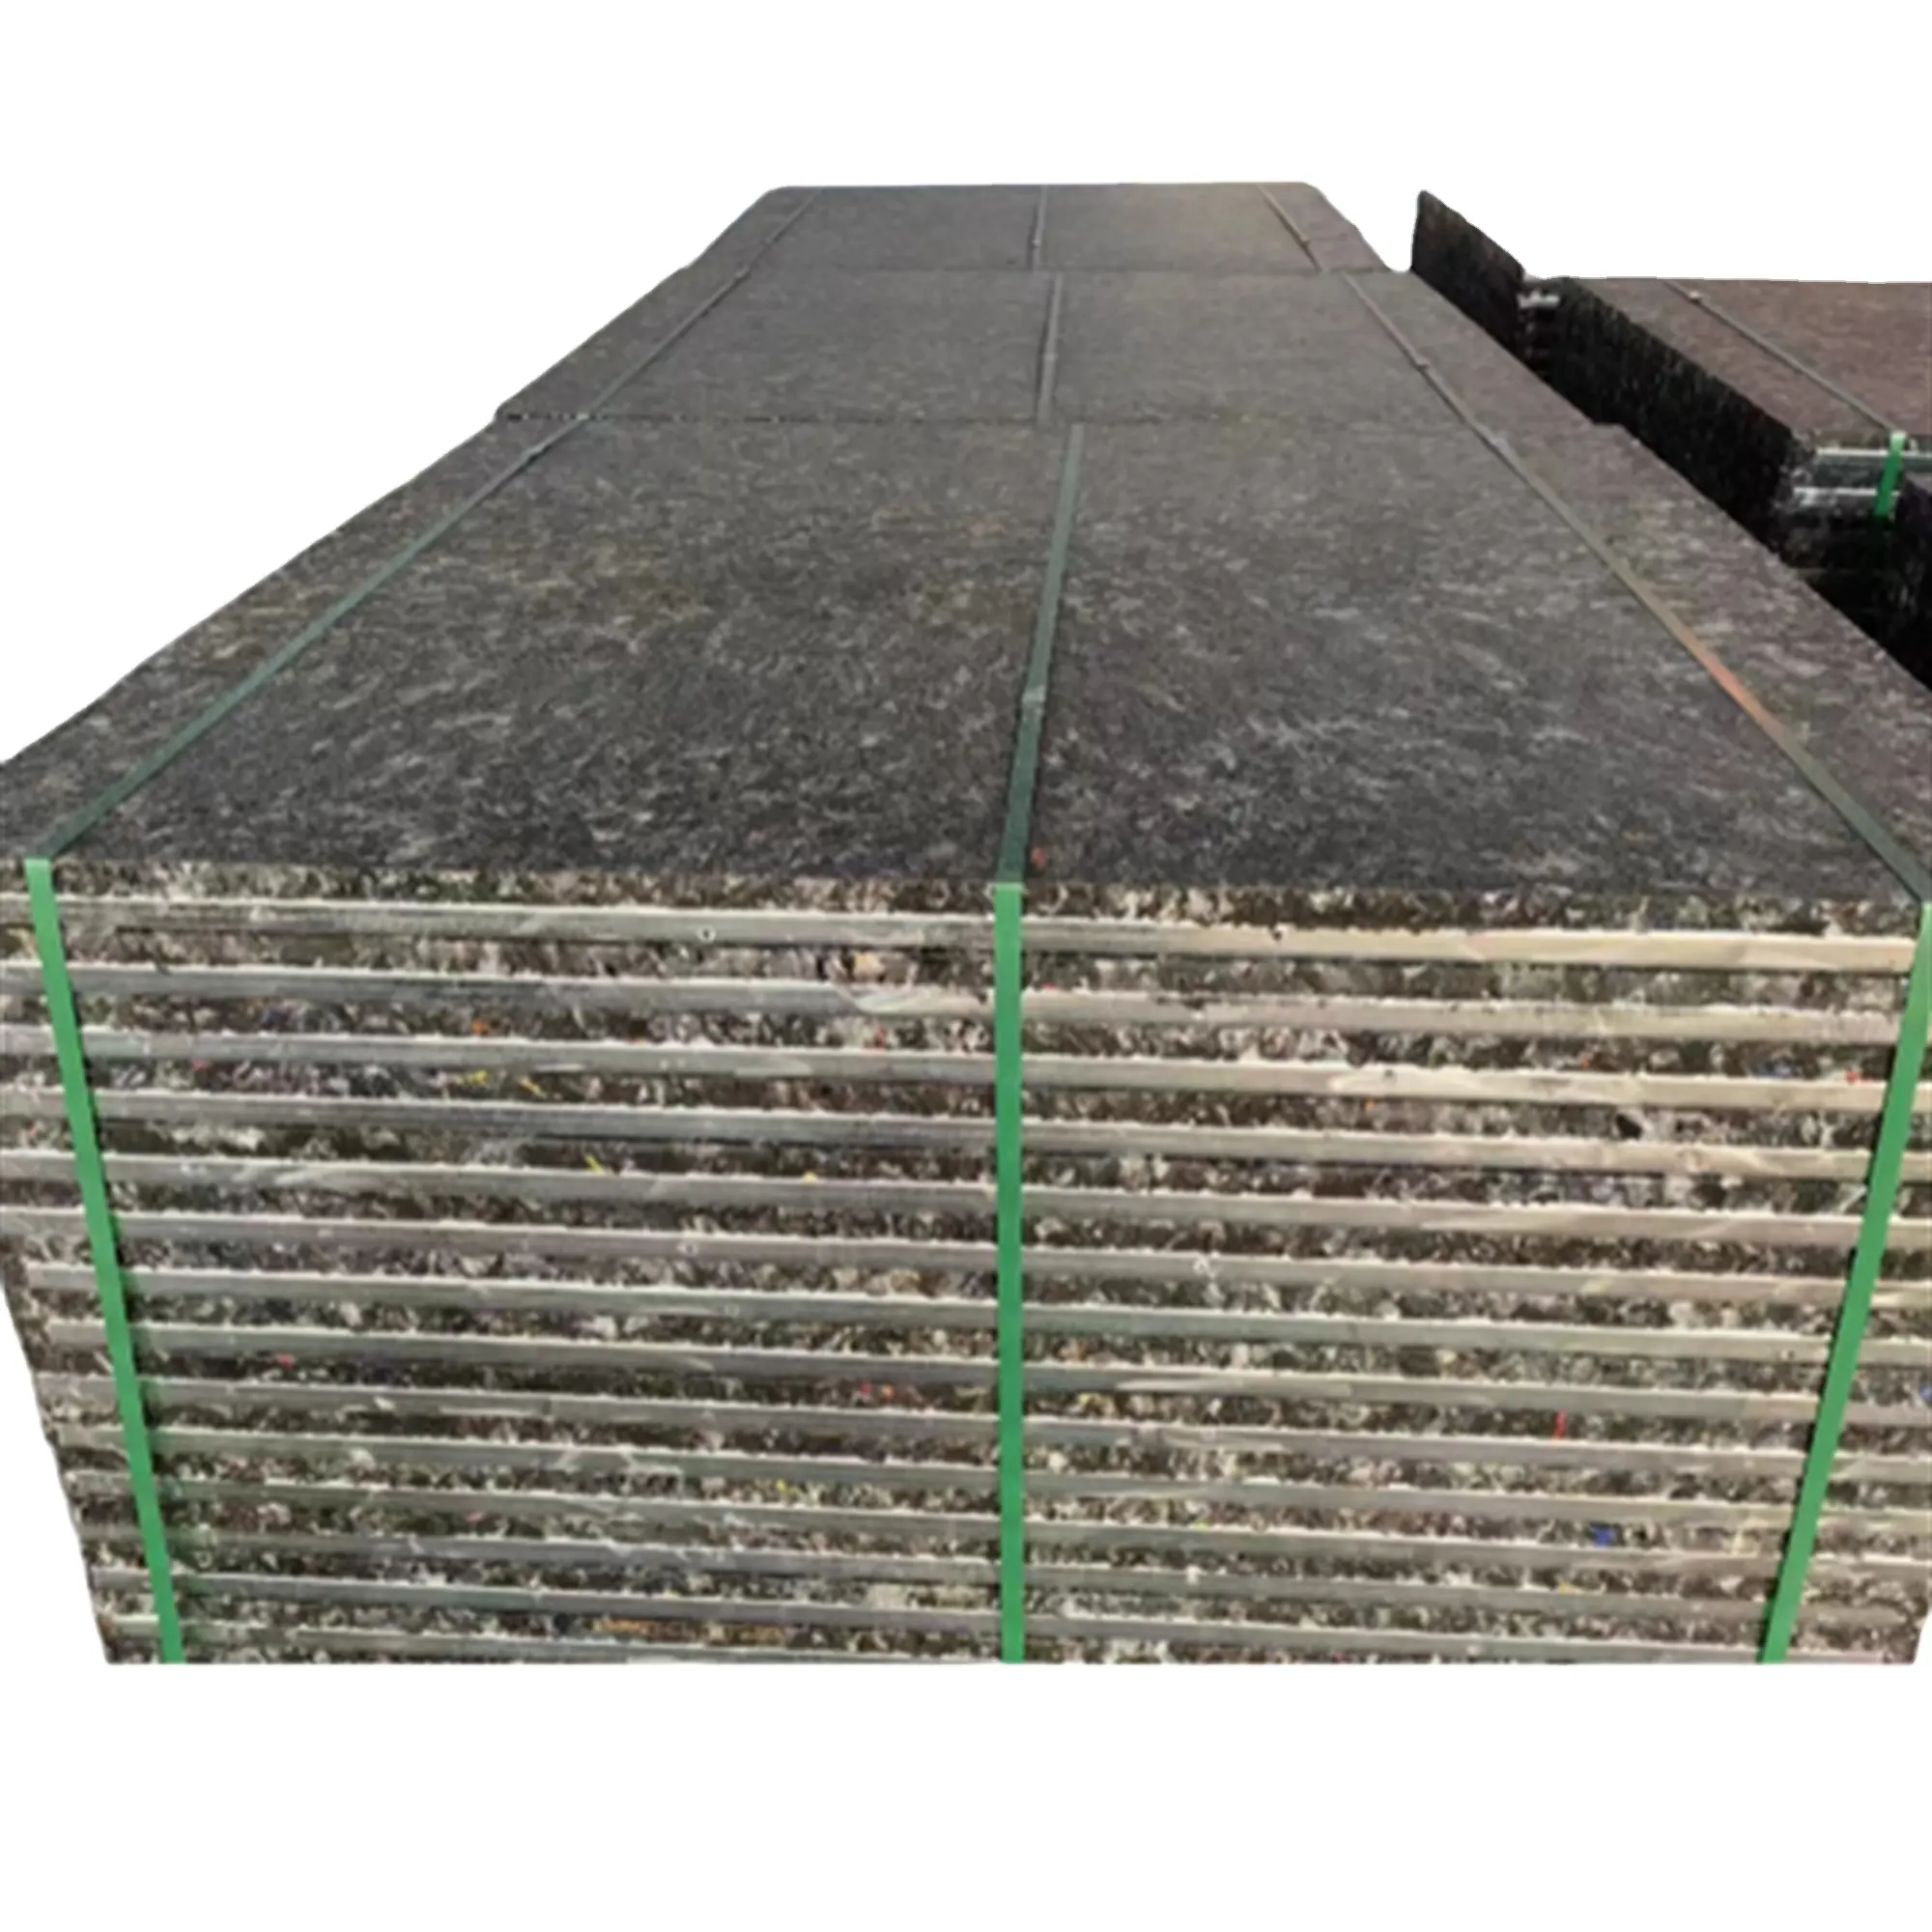 Hollow Block brick paver pallet cost effective engineering bricks pallets retaining wall blocks by the pallet